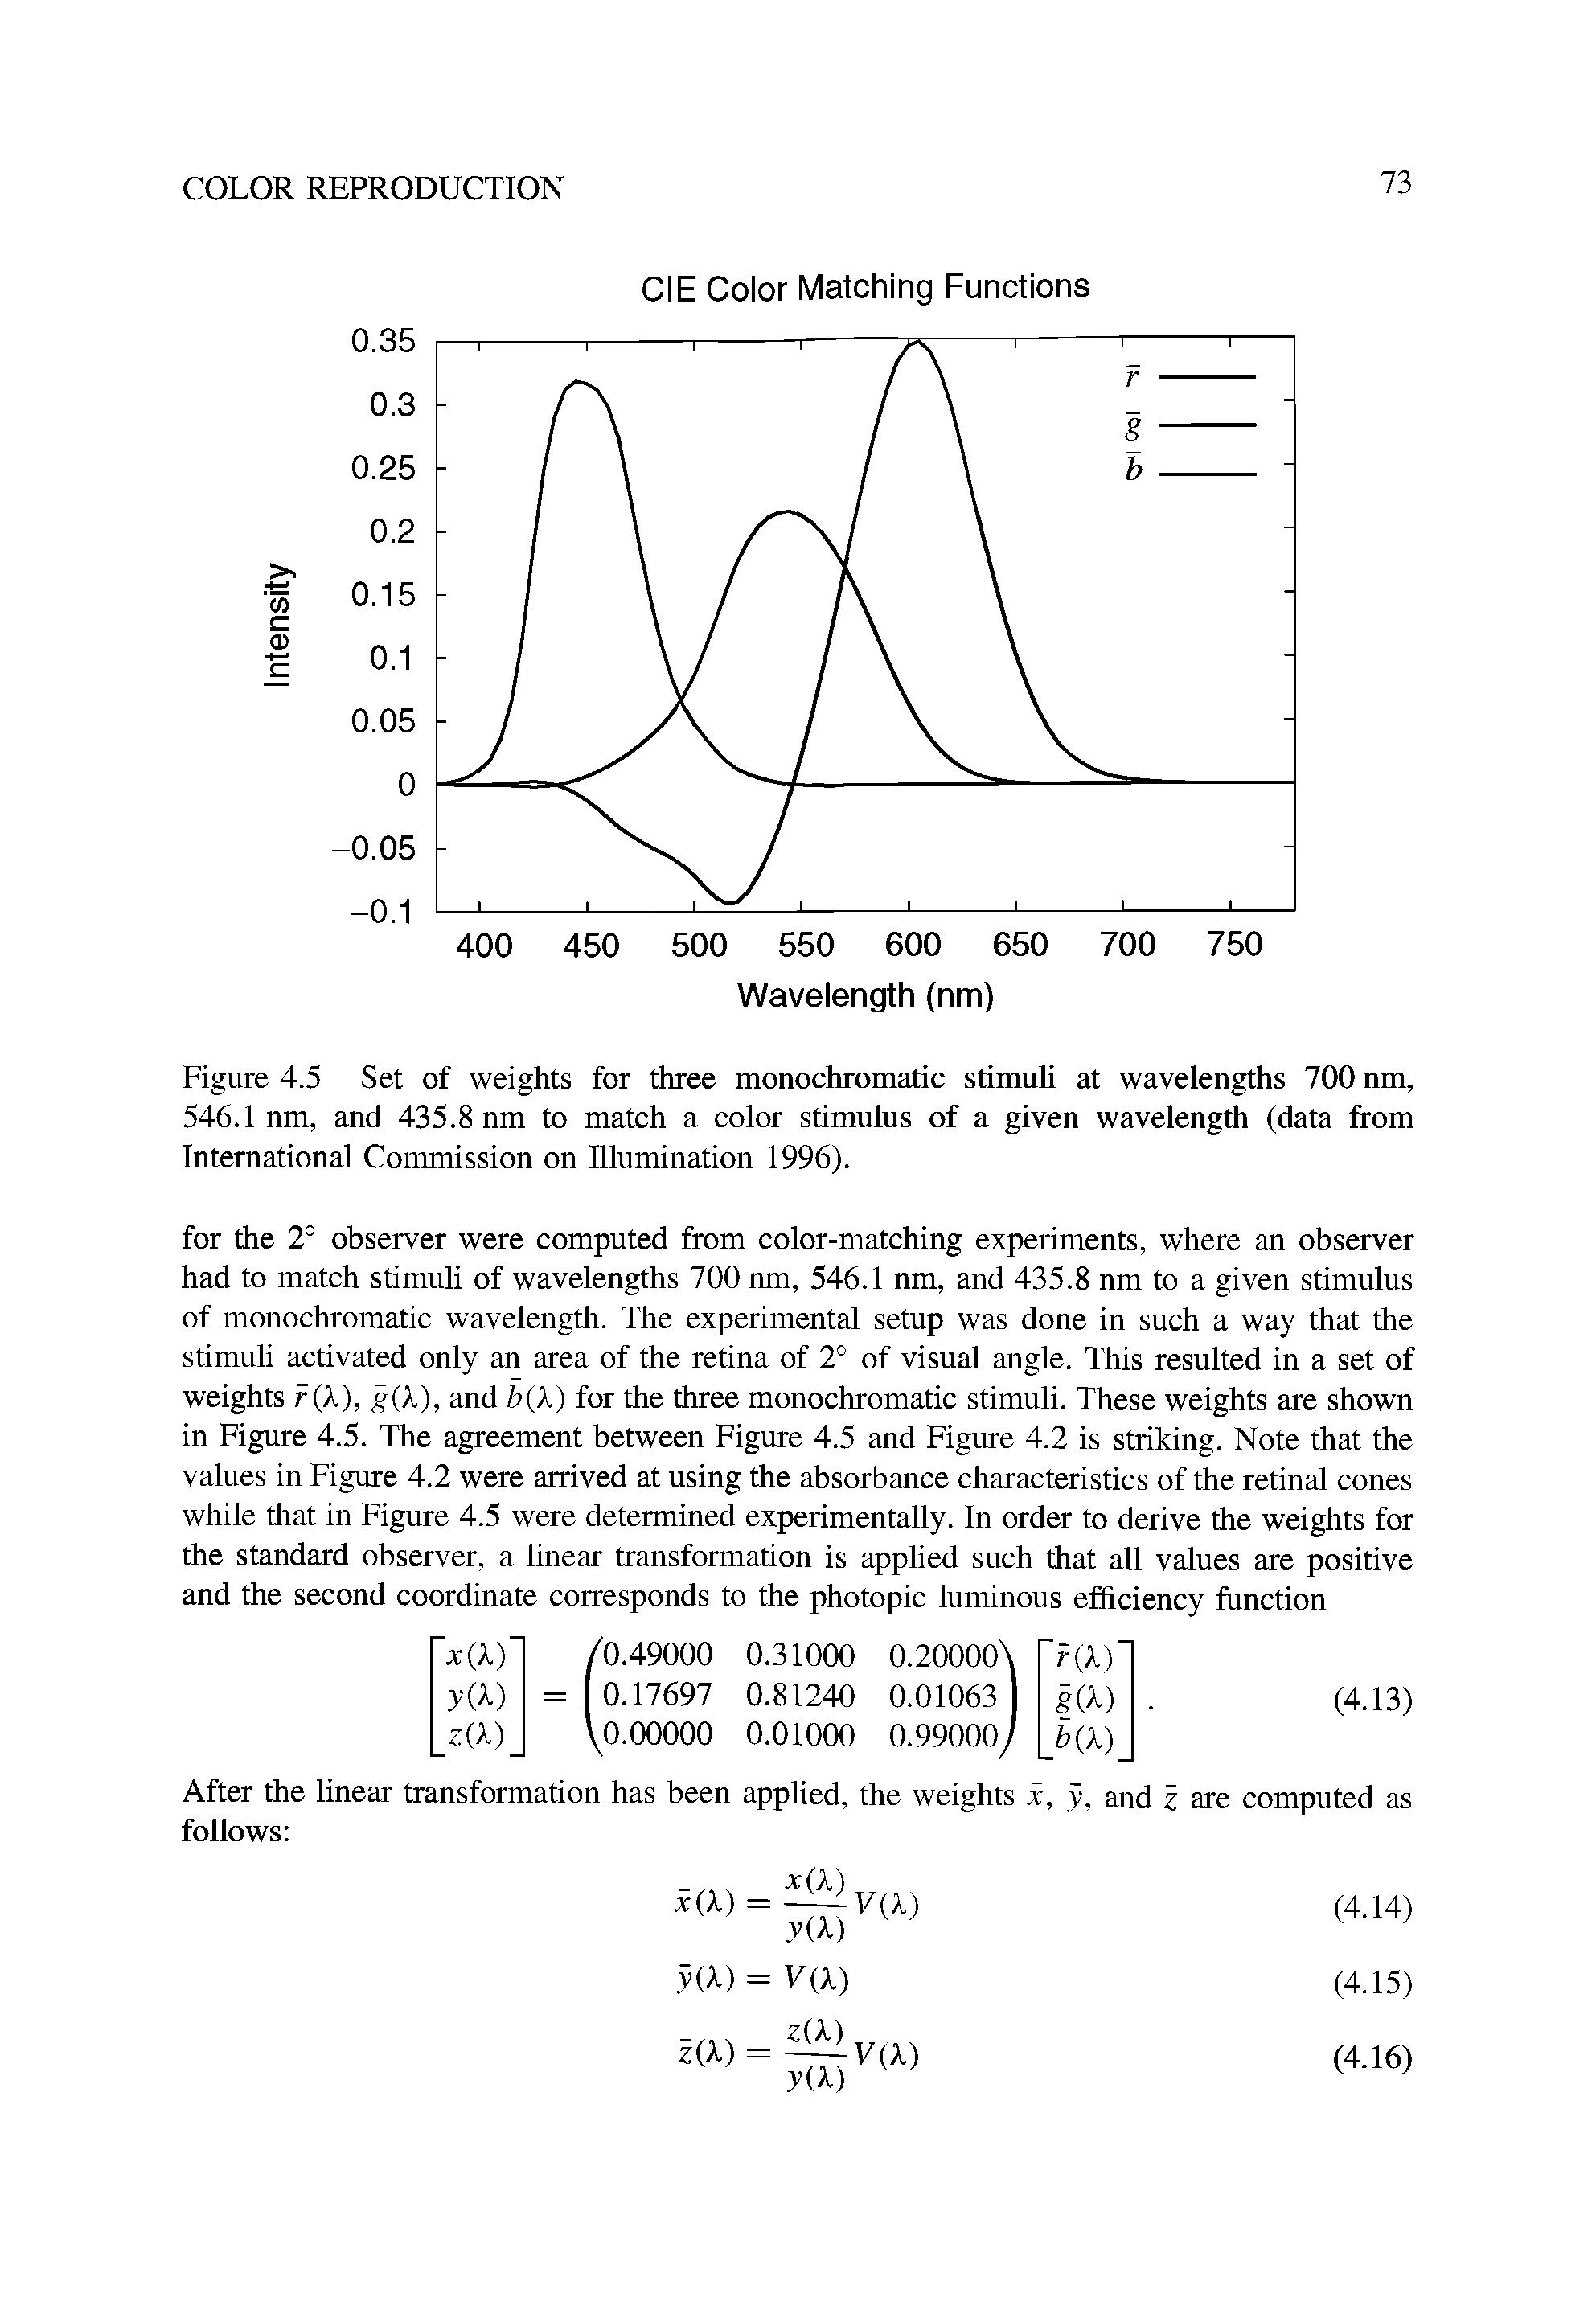 Figure 4.5 Set of weights for three monochromatic stimuli at wavelengths 700 nm, 546.1 nm, and 435.8 nm to match a color stimulus of a given wavelength (data from International Commission on Illumination 1996).